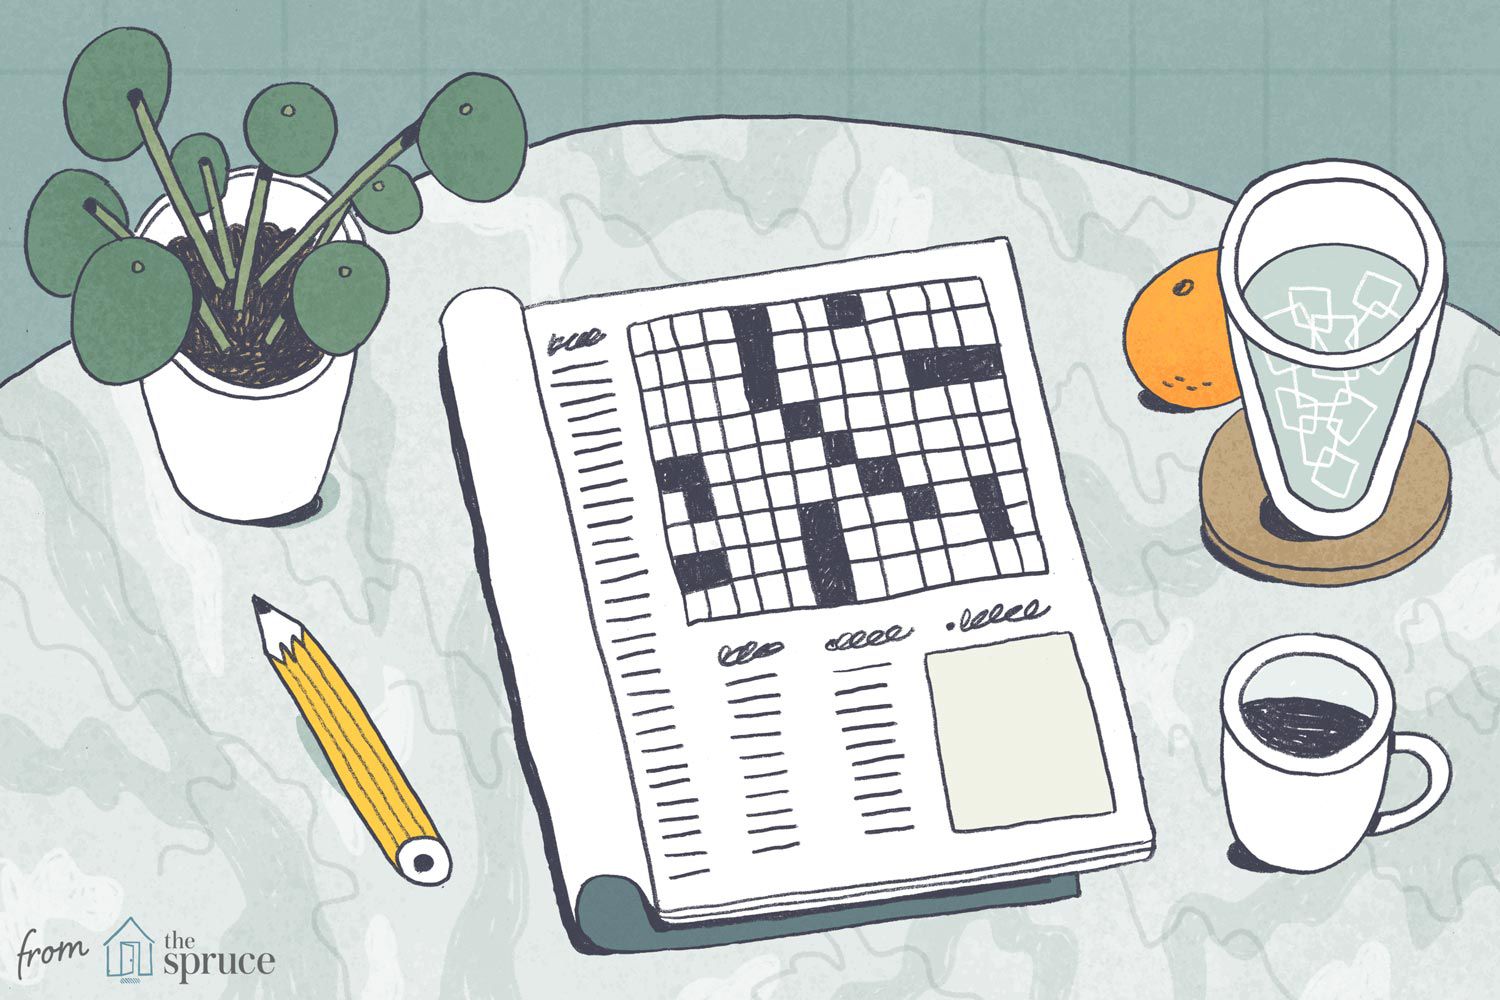 Enjoy playing crossword puzzles online with the help of this site: